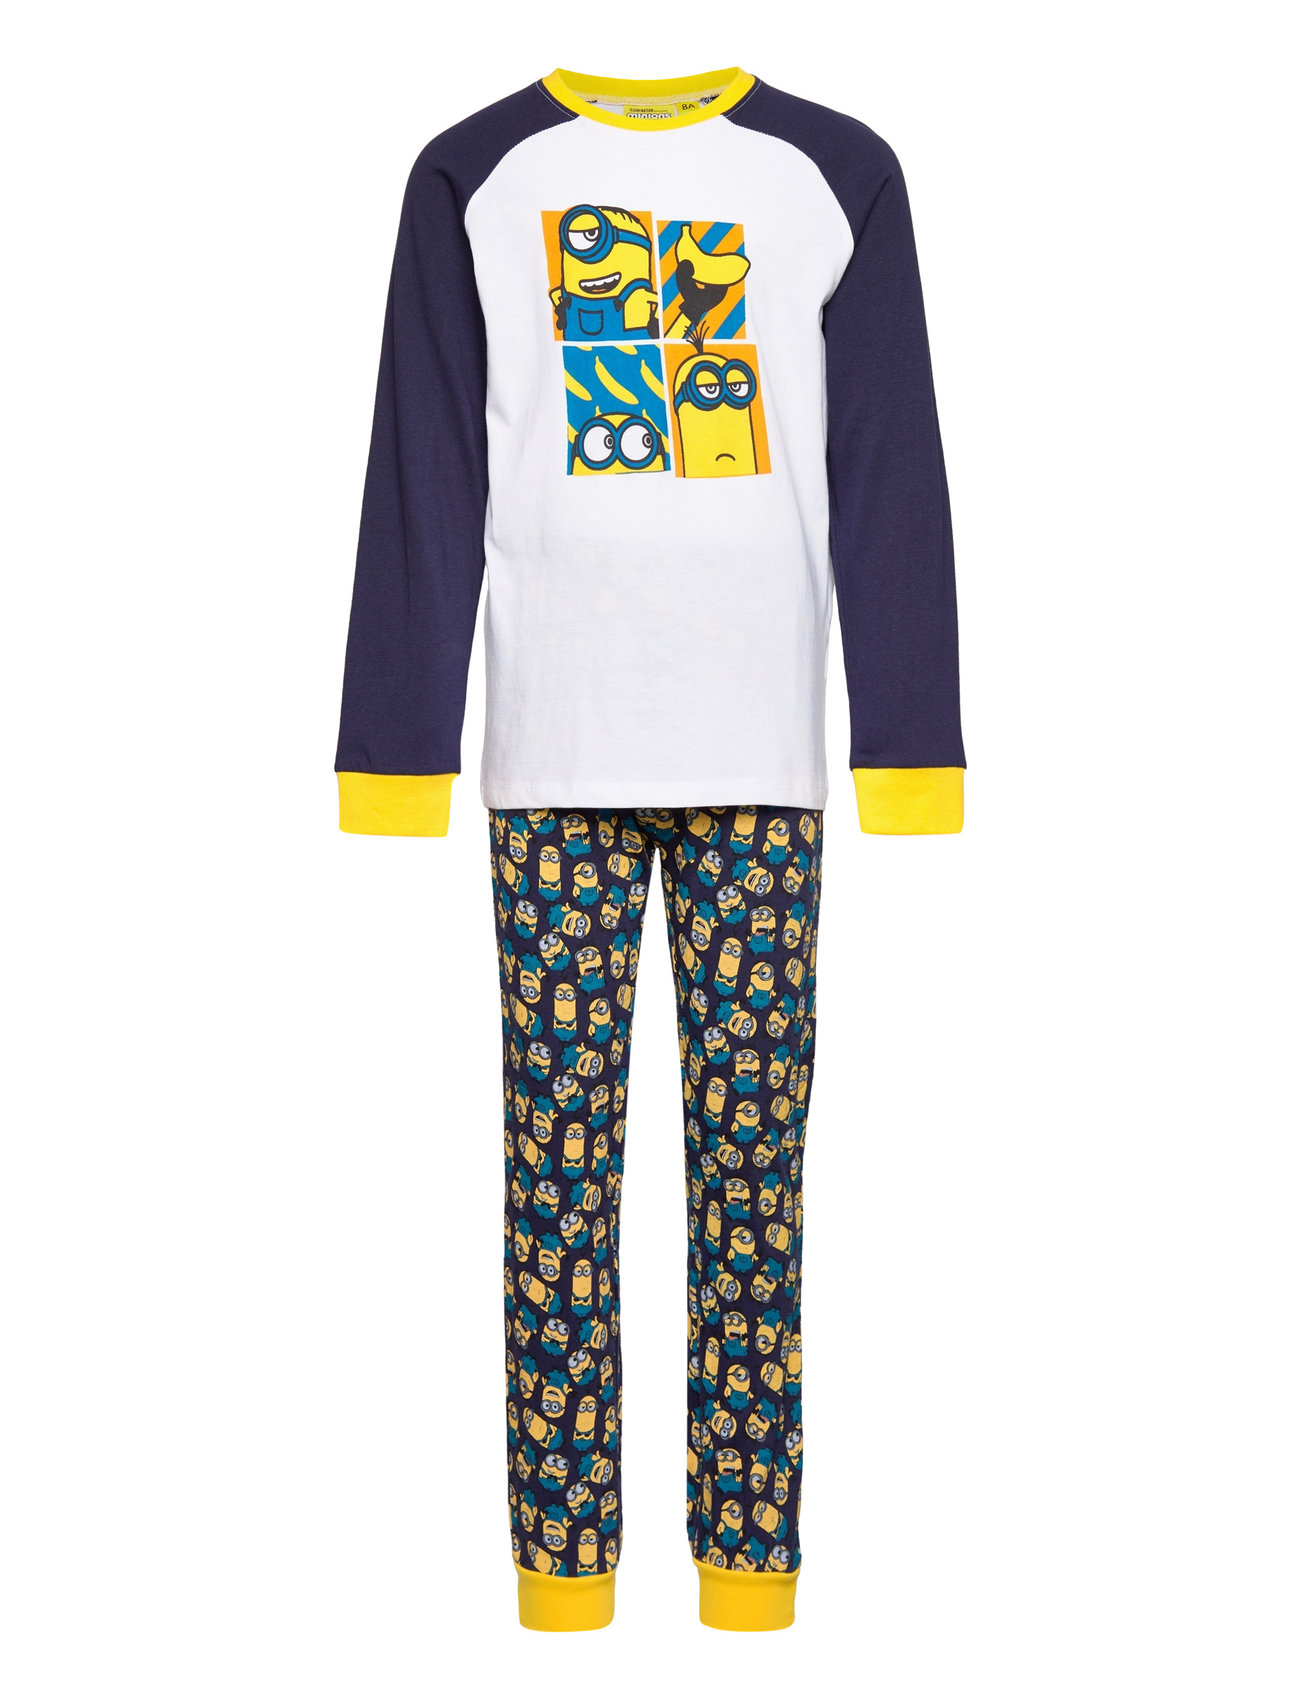 schermutseling ophouden Meter Minions Long Pyjama (Navy), (20.48 €) | Large selection of outlet-styles |  Booztlet.com